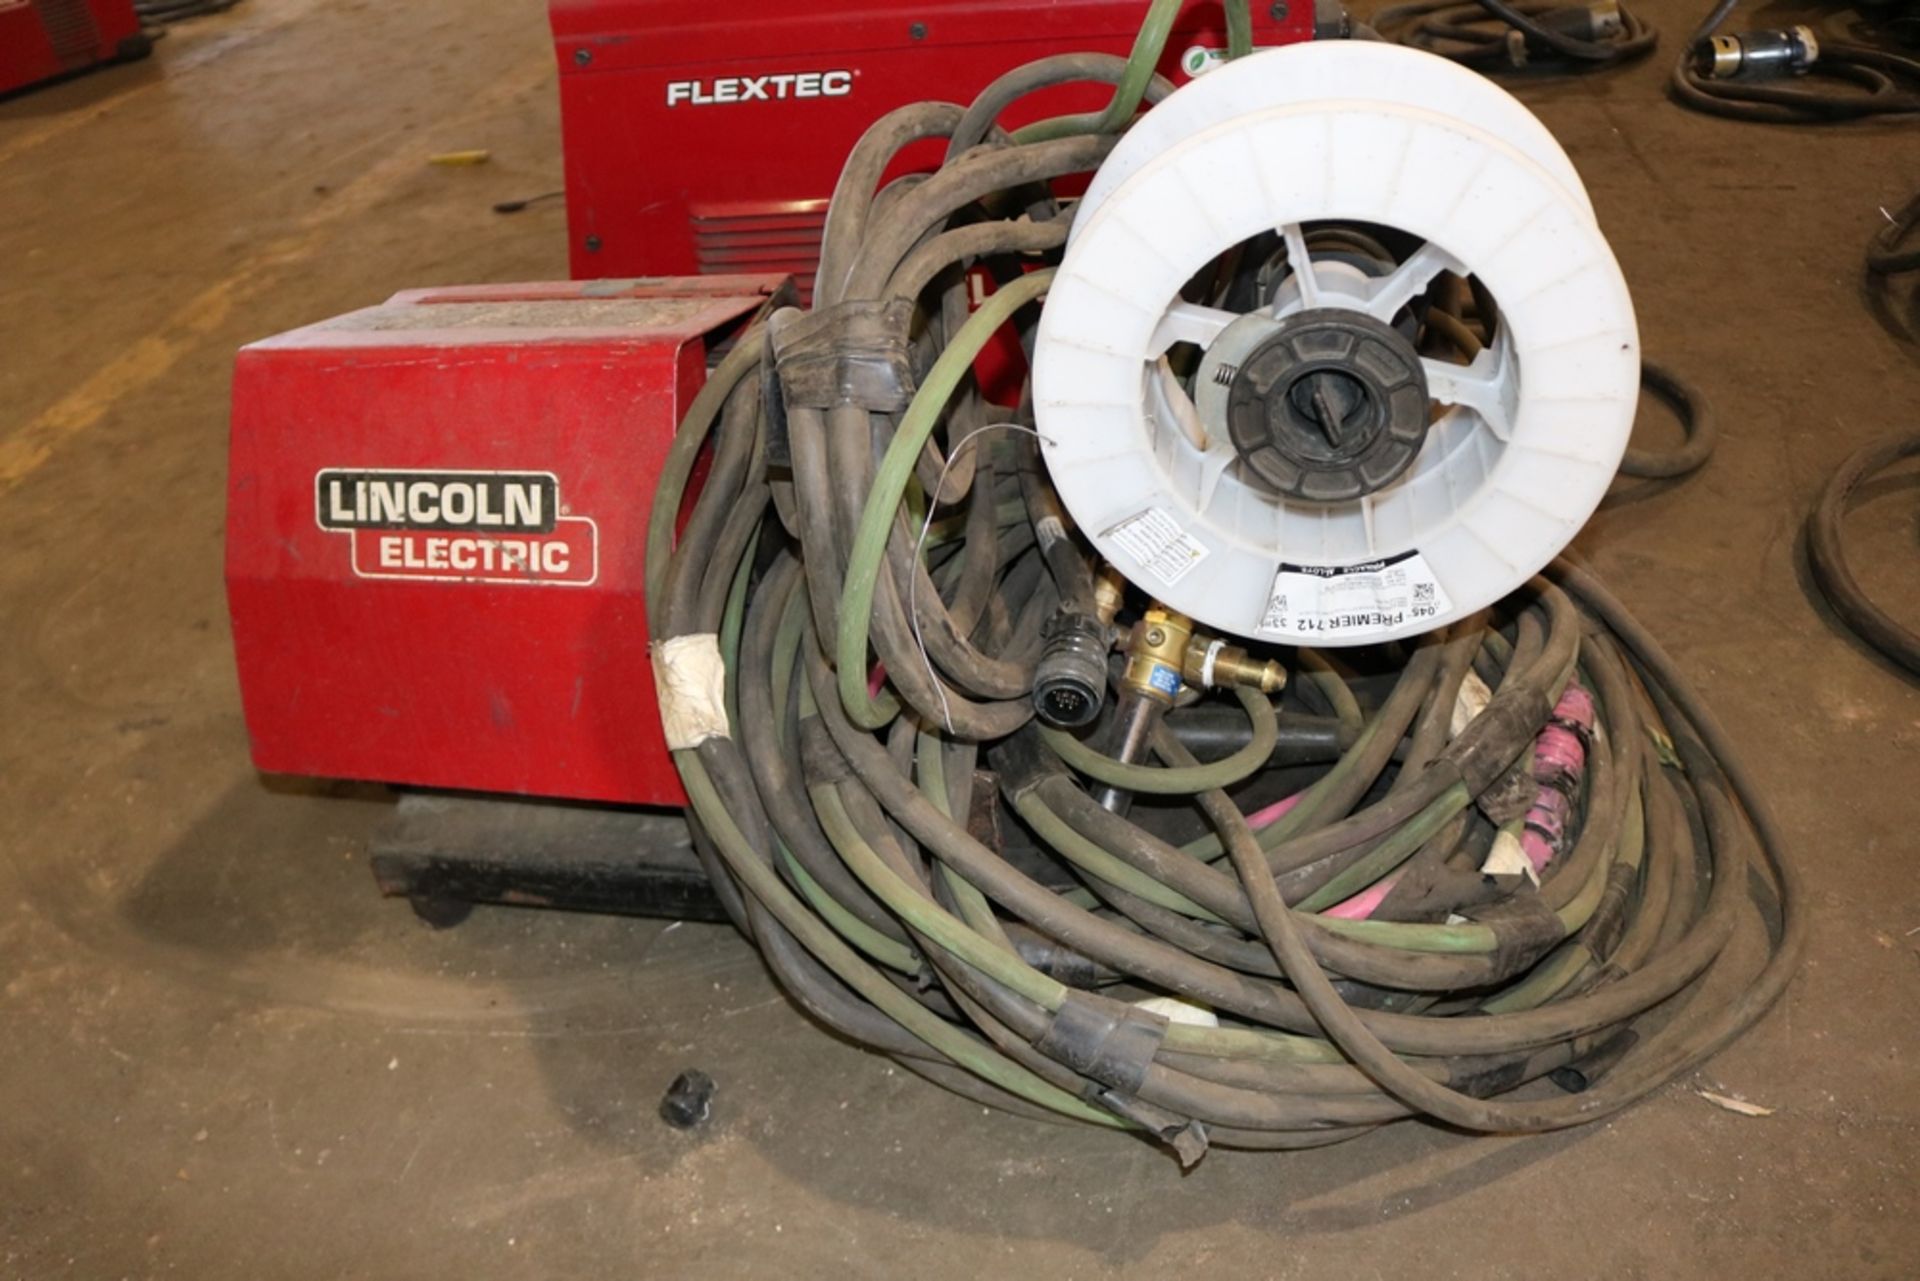 2020 Lincoln Electric Flextec 500X Welder with LF-72 Feeder - Image 4 of 8